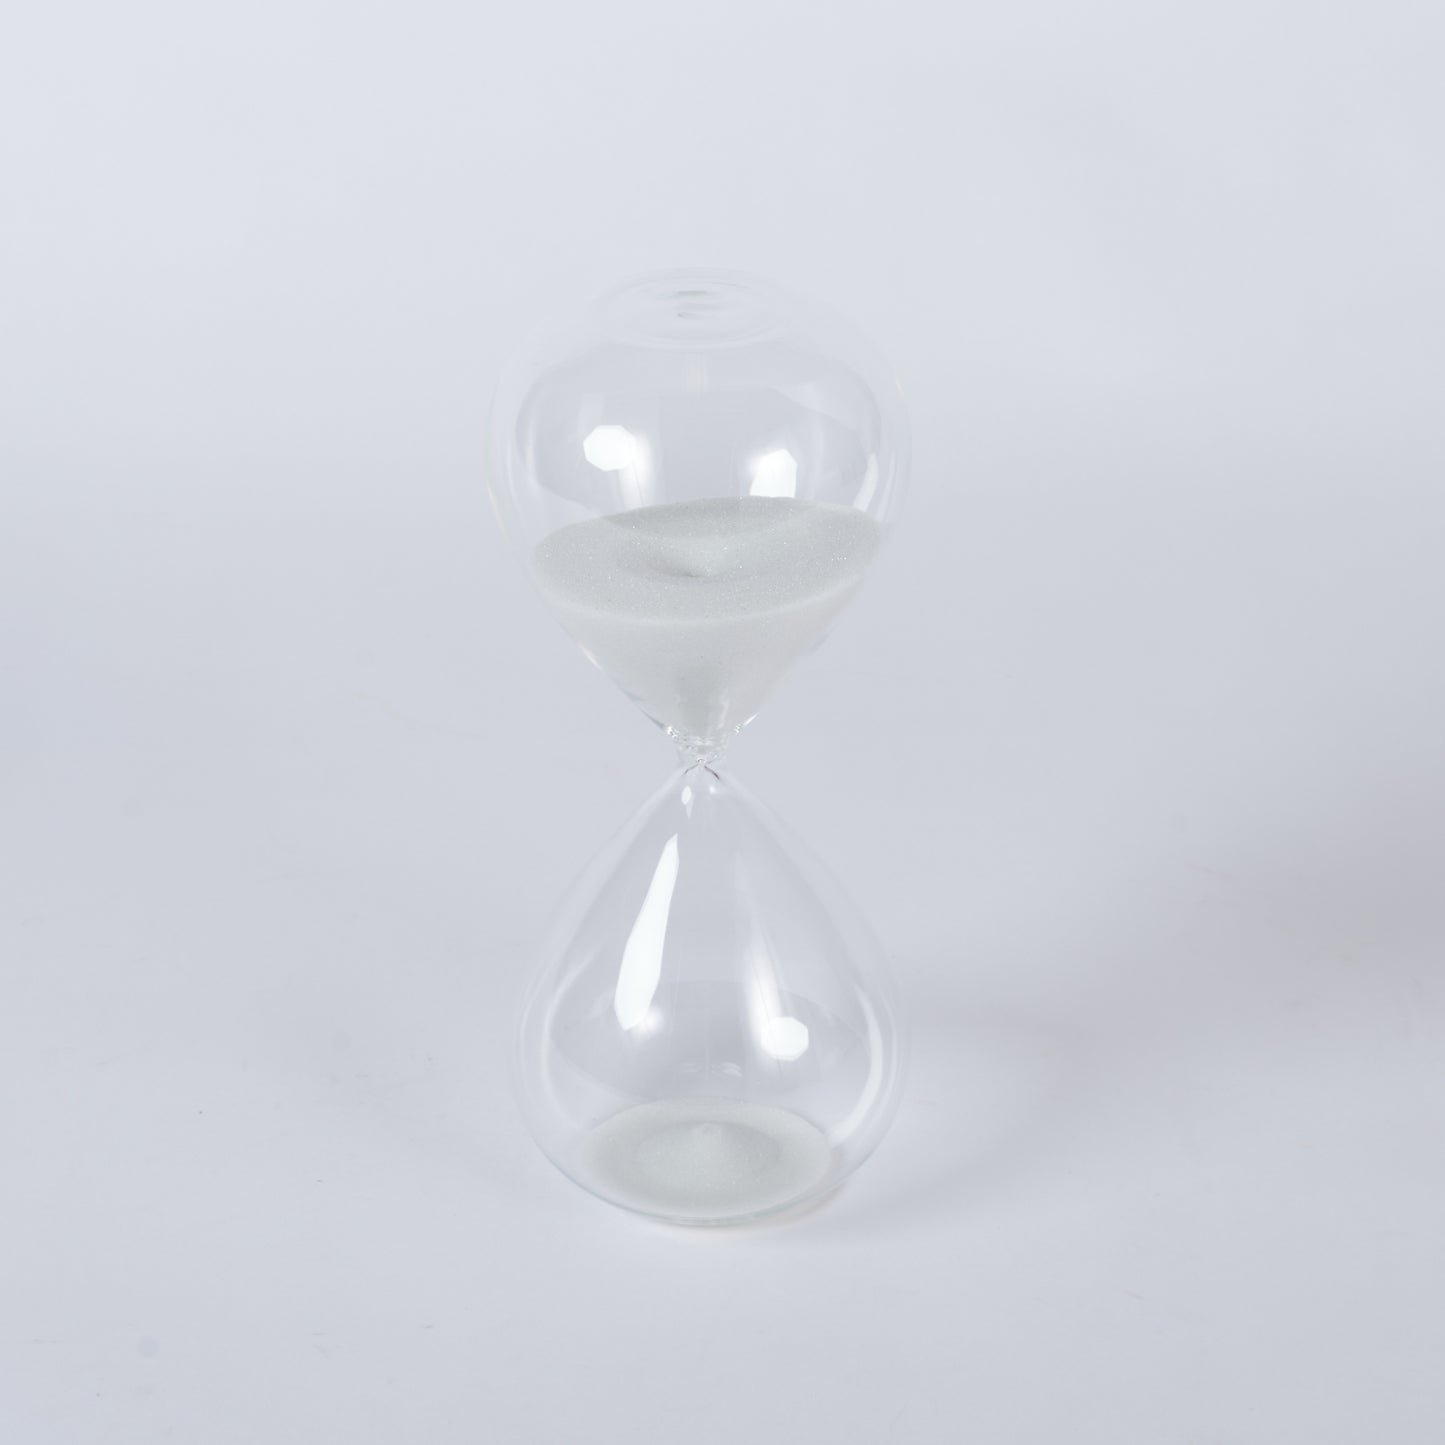 The Almost One Hourglass